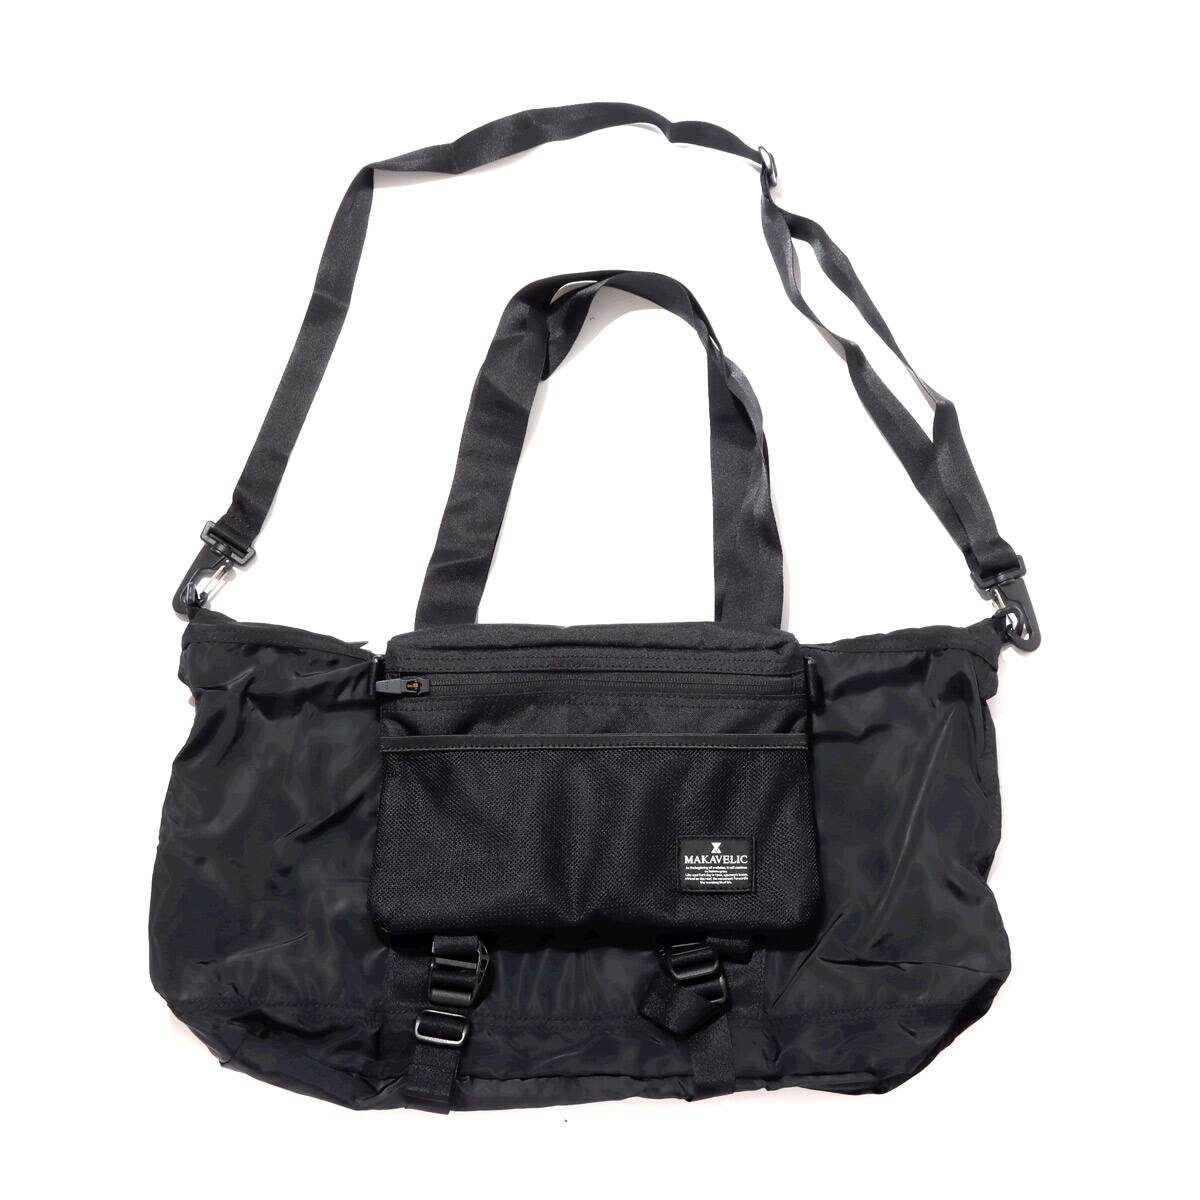 MAKAVELIC PACKABLE TOTE BLACK 21SP-I